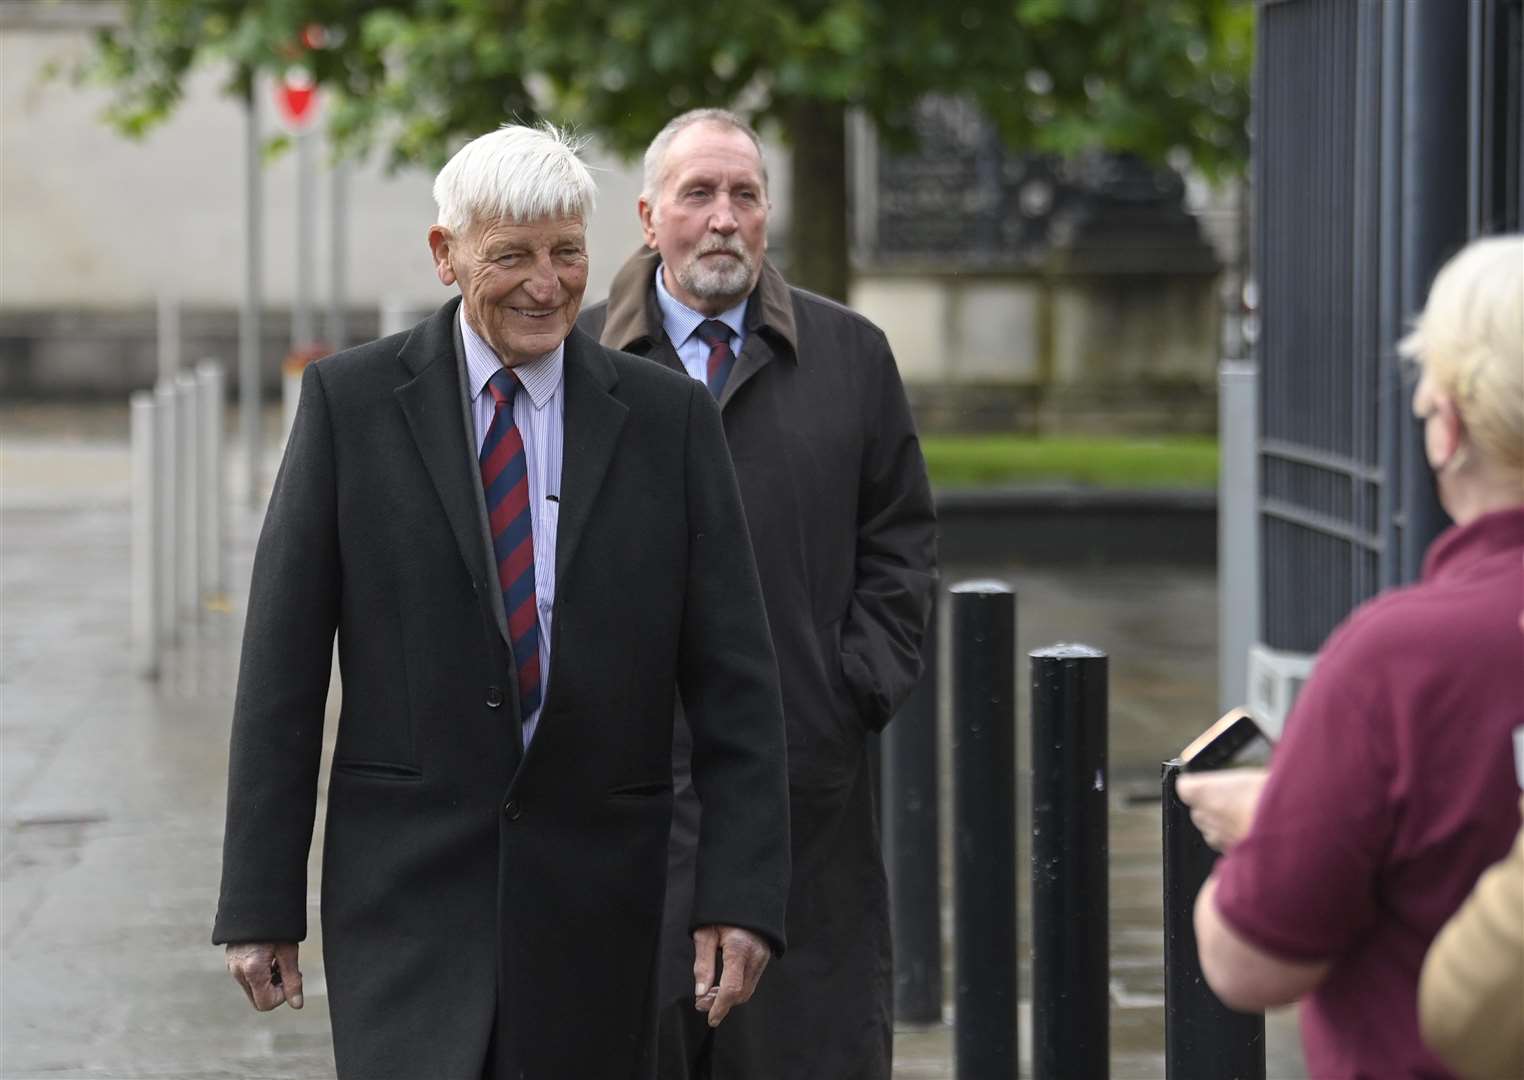 Dennis Hutchings arrives at Laganside Courts, Belfast (Mark Marlow/PA)